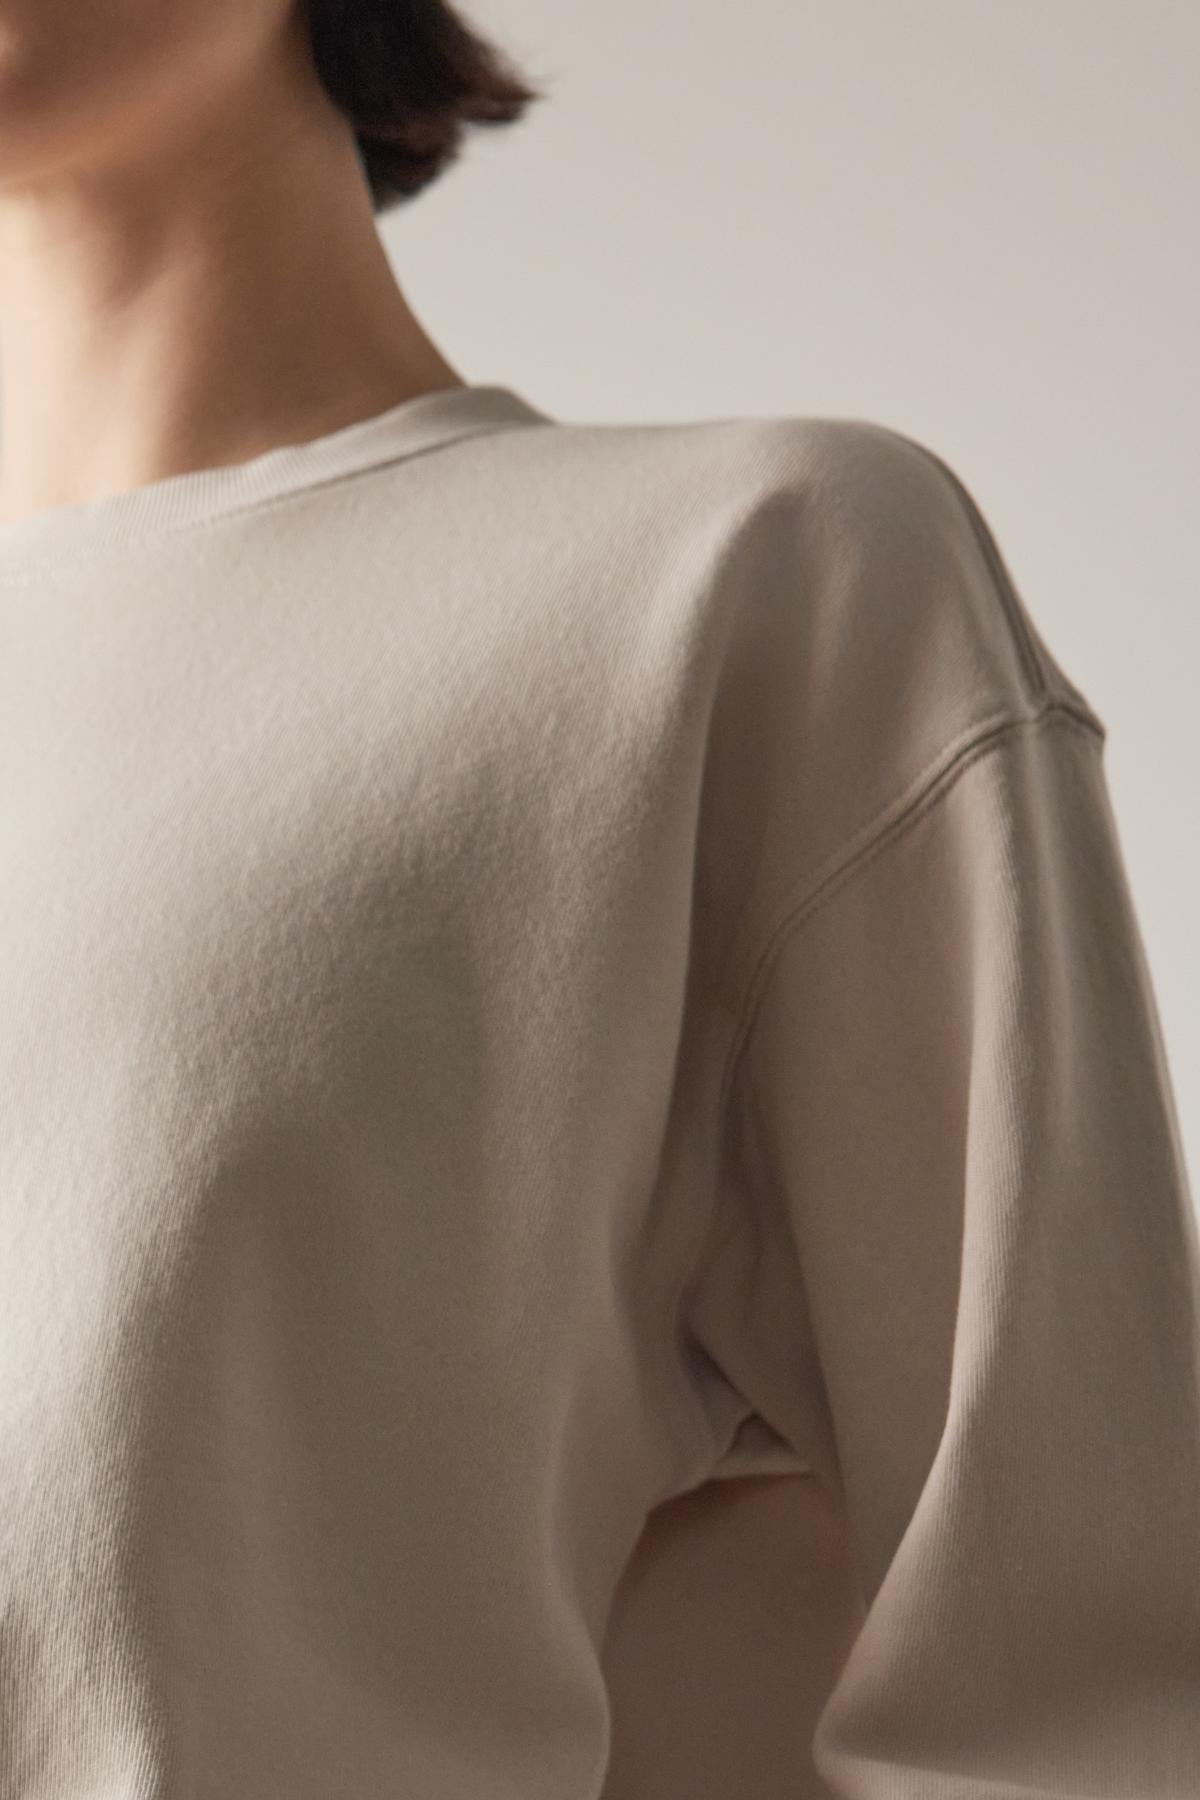 Rear view of a person wearing a Ynez Sweatshirt by Velvet by Jenny Graham, focusing on the shirt's texture and stitching details.-36863307645121